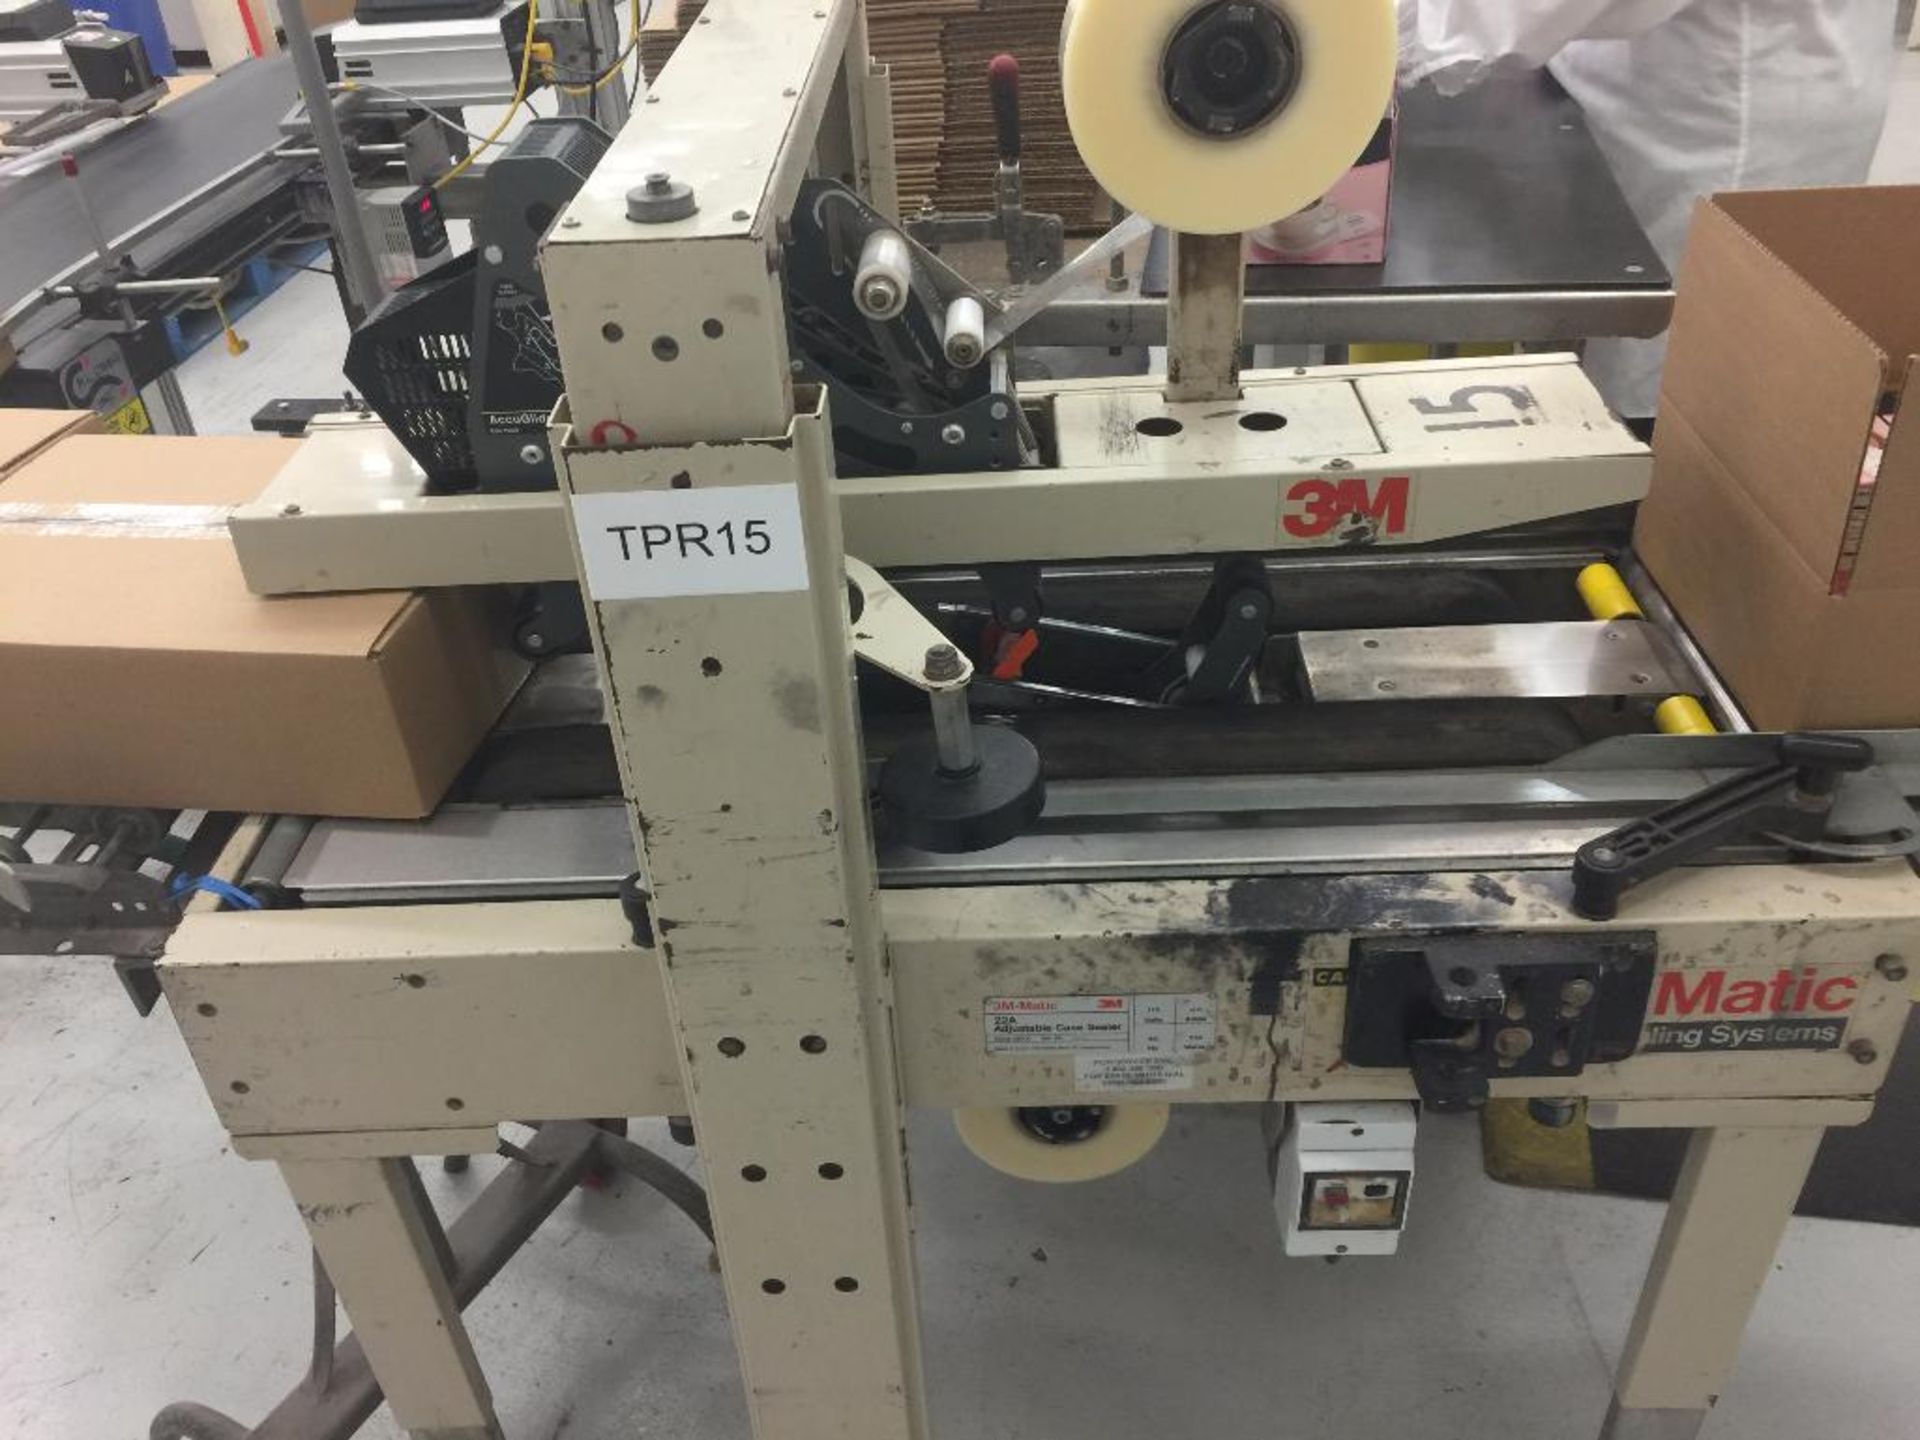 3M-Matic 22A adjustable case sealer, model 28600, s/n 8492, top and bottom tape heads. (TPR15) - **